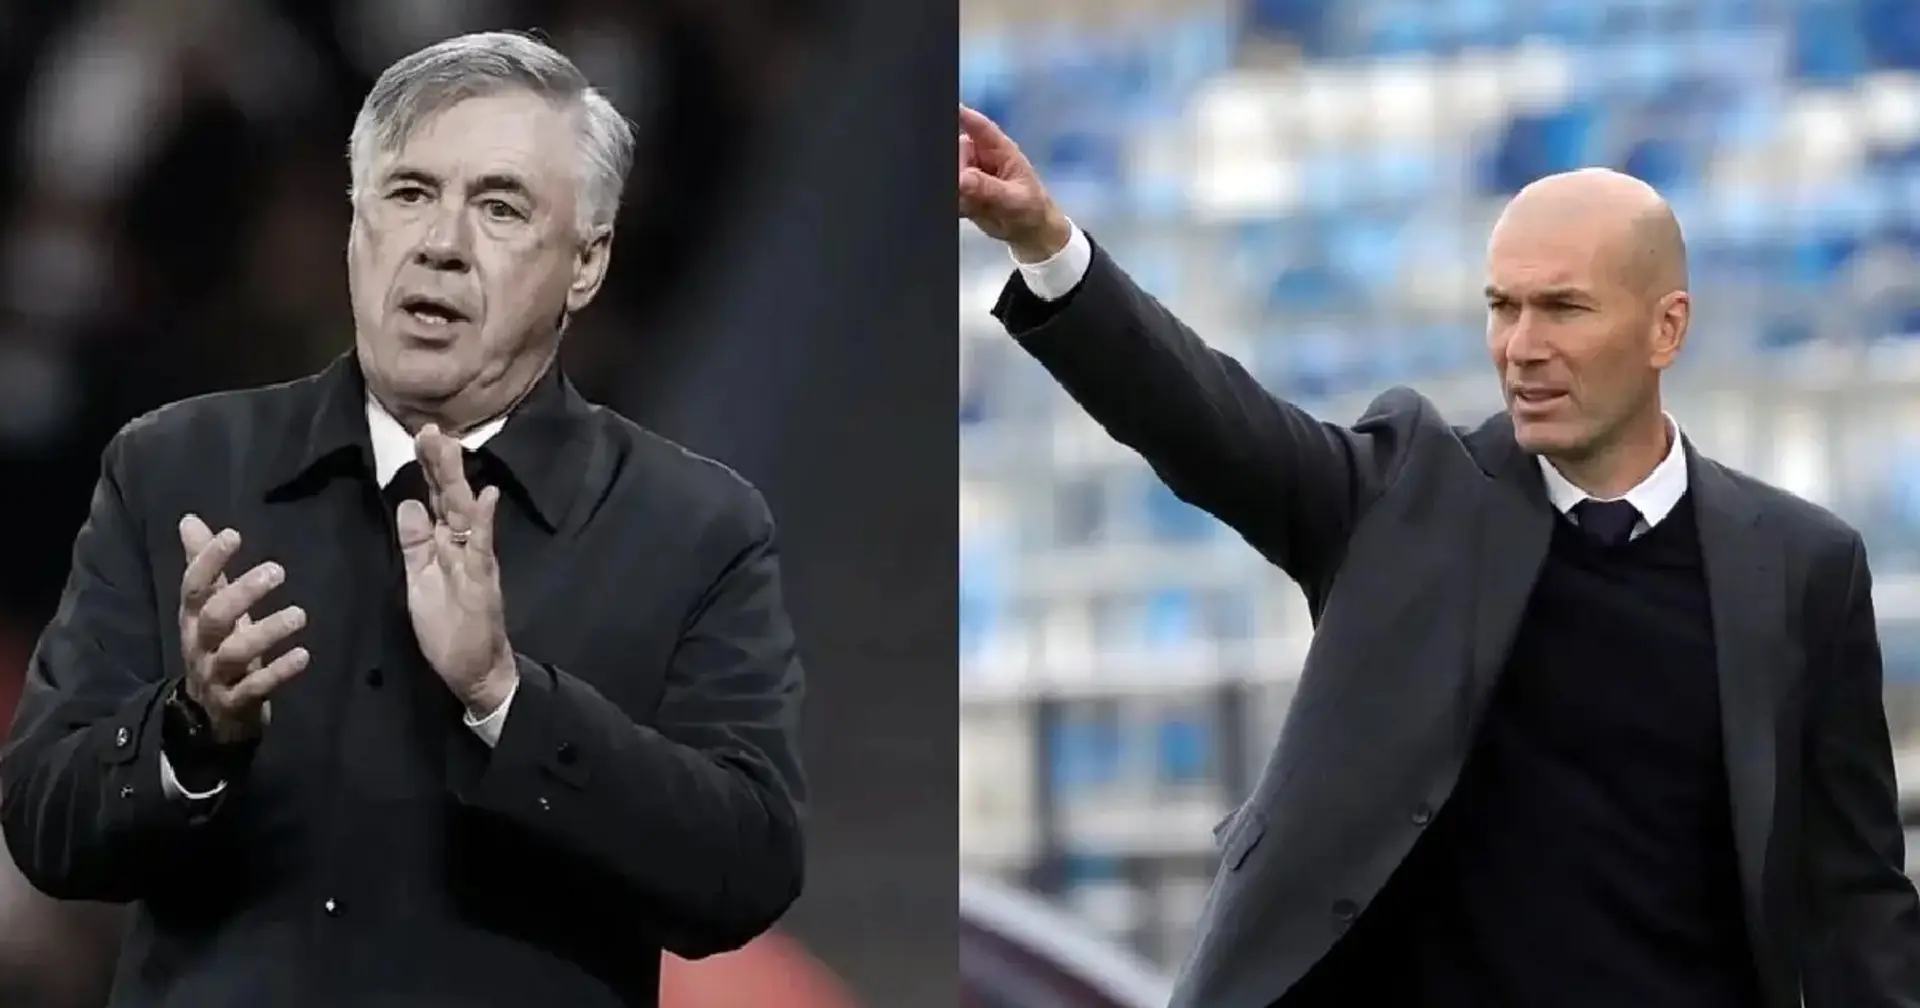 Ancelotti equals Zidane's Real Madrid record - it took him fewer games